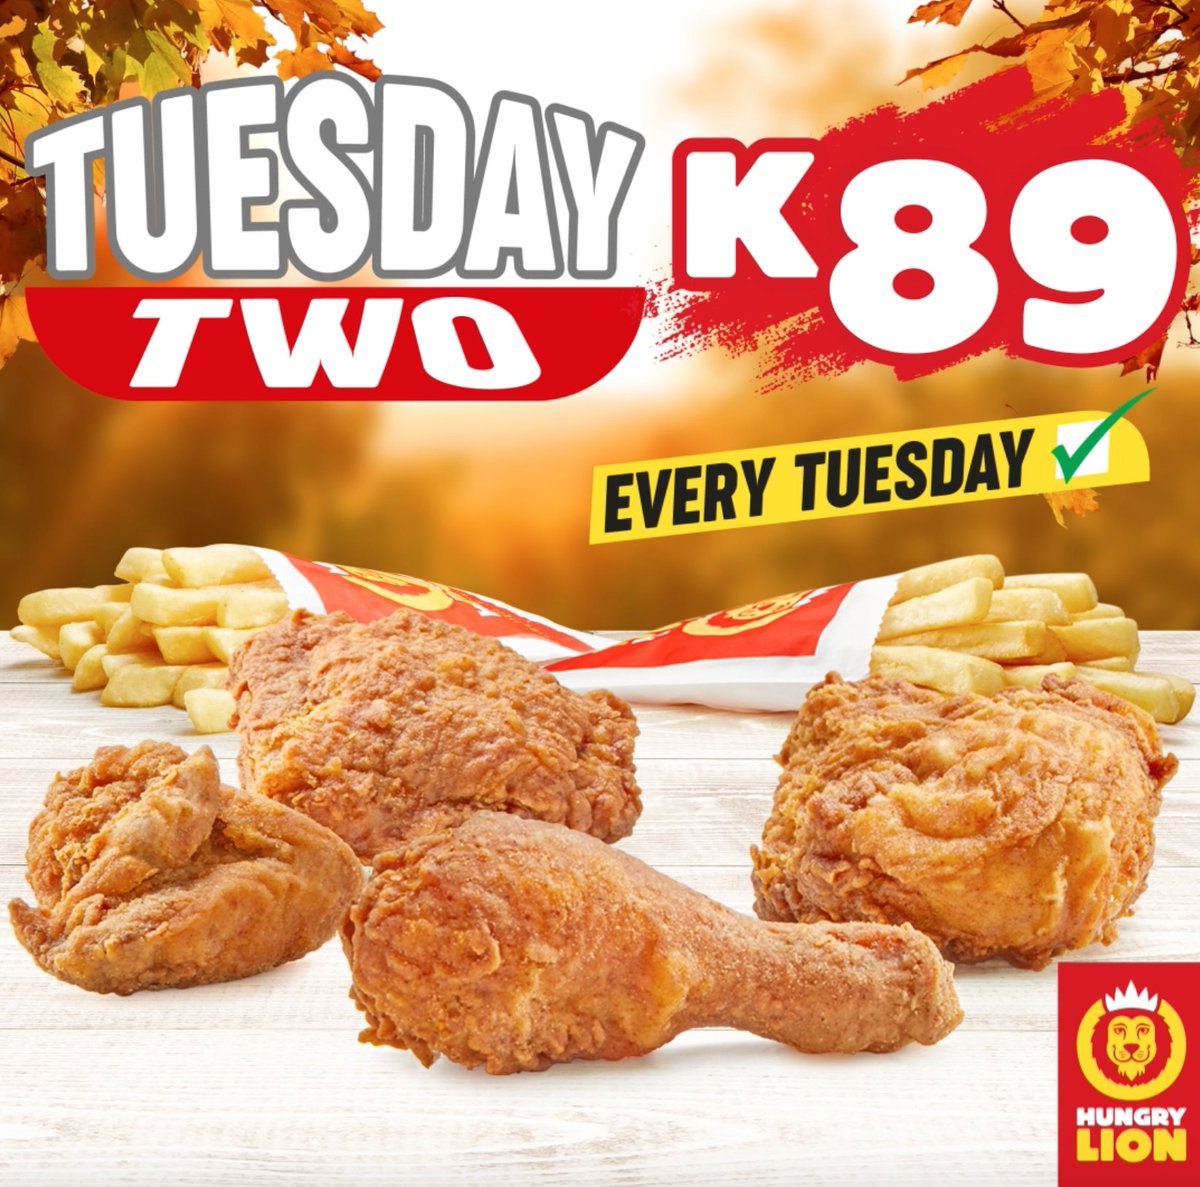 This week is going to be a loooooong one, so why not grab a #TuesdayTwo for K89 to bring a smile to someone's face? Big Bite 2 + Big Bite 2 = Tuesday Two! 🍟🍗🍗🍟🍗🍗